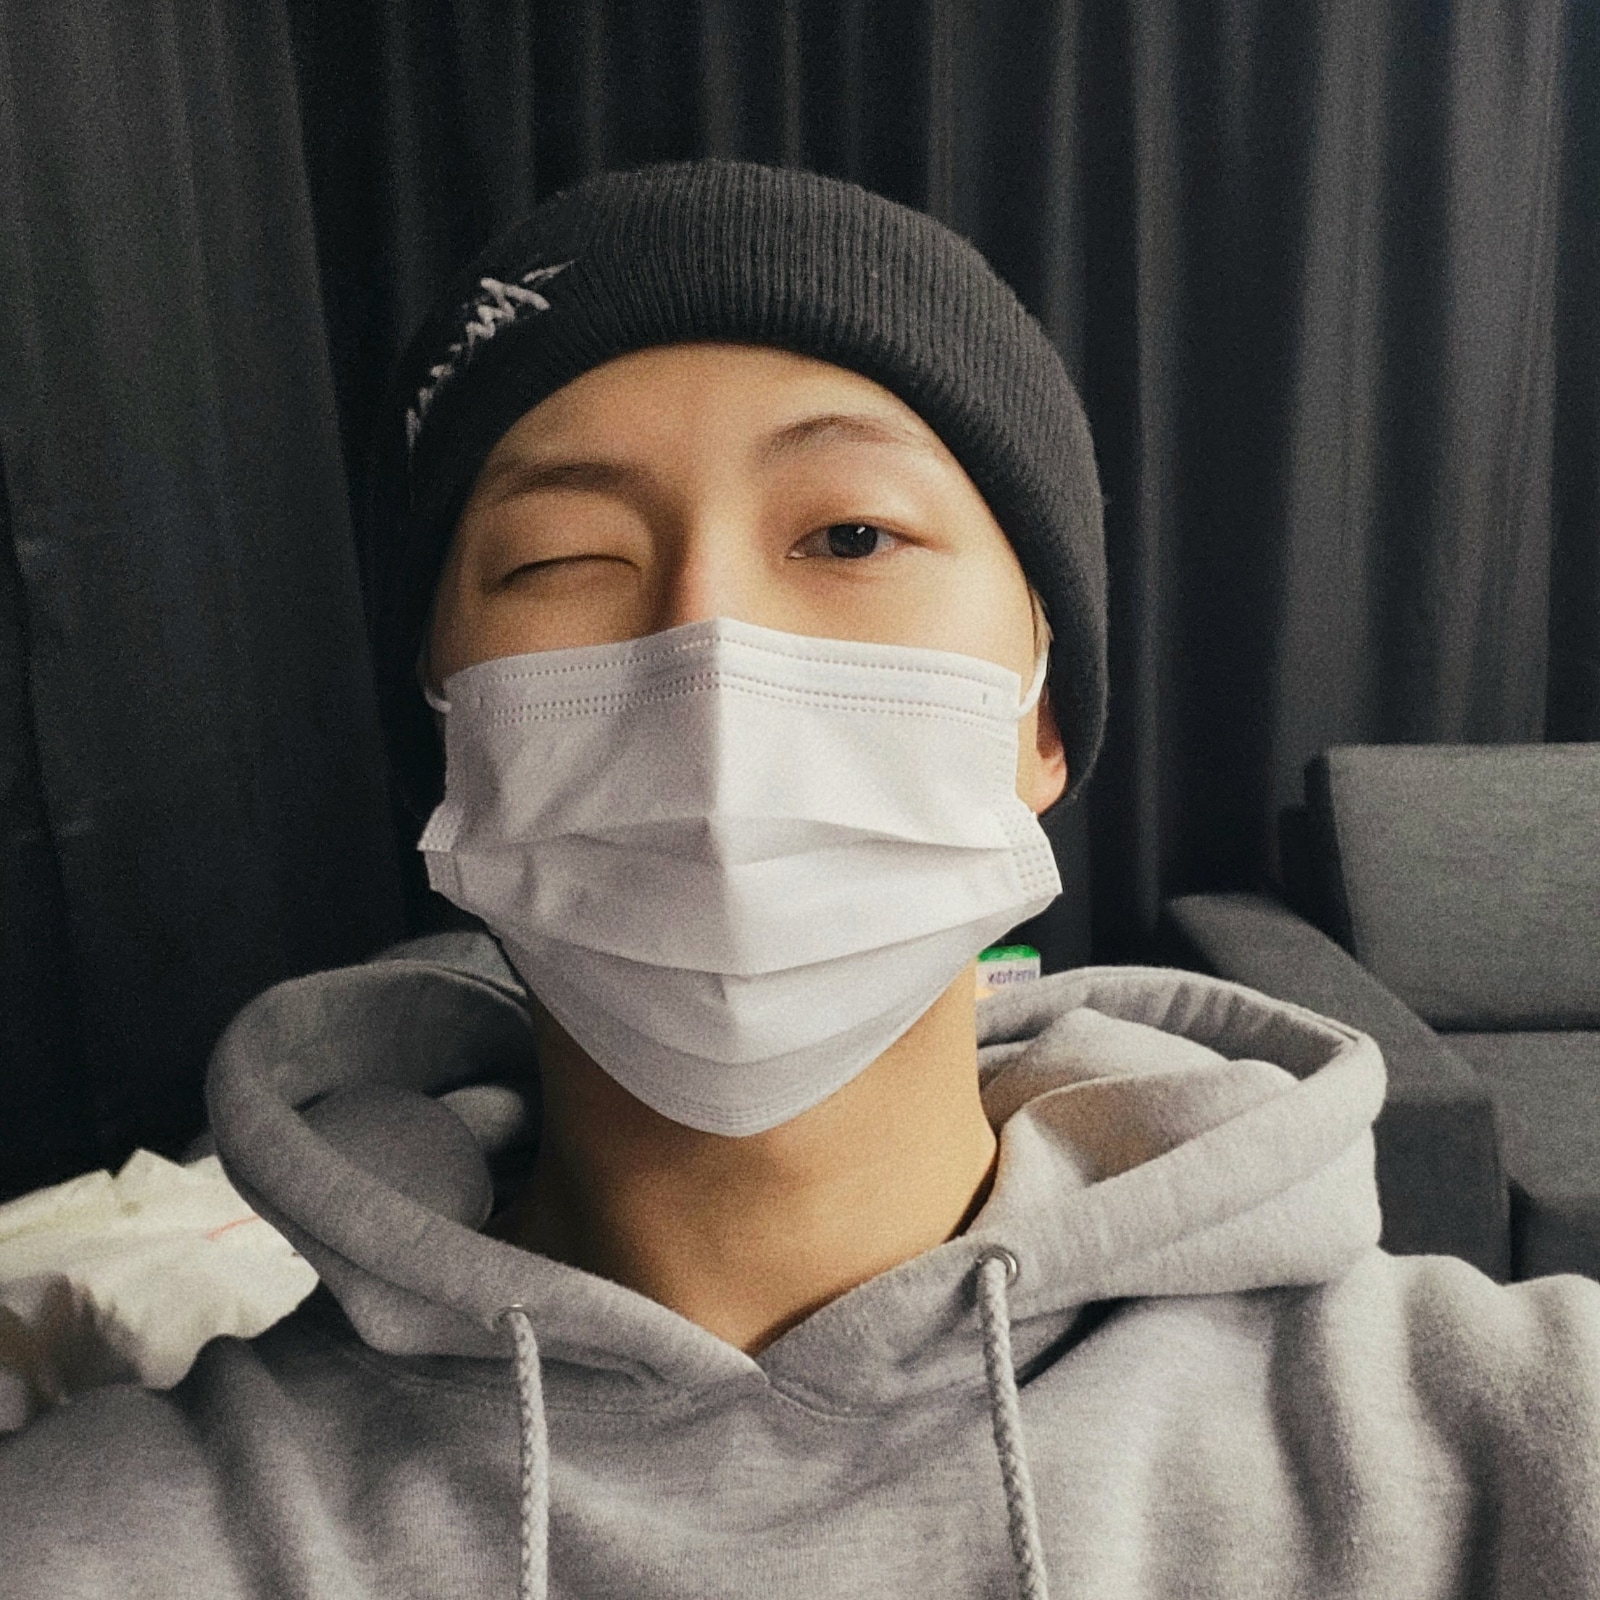 BTS's RM Drops A Major Spoiler About An Upcoming Tour During The